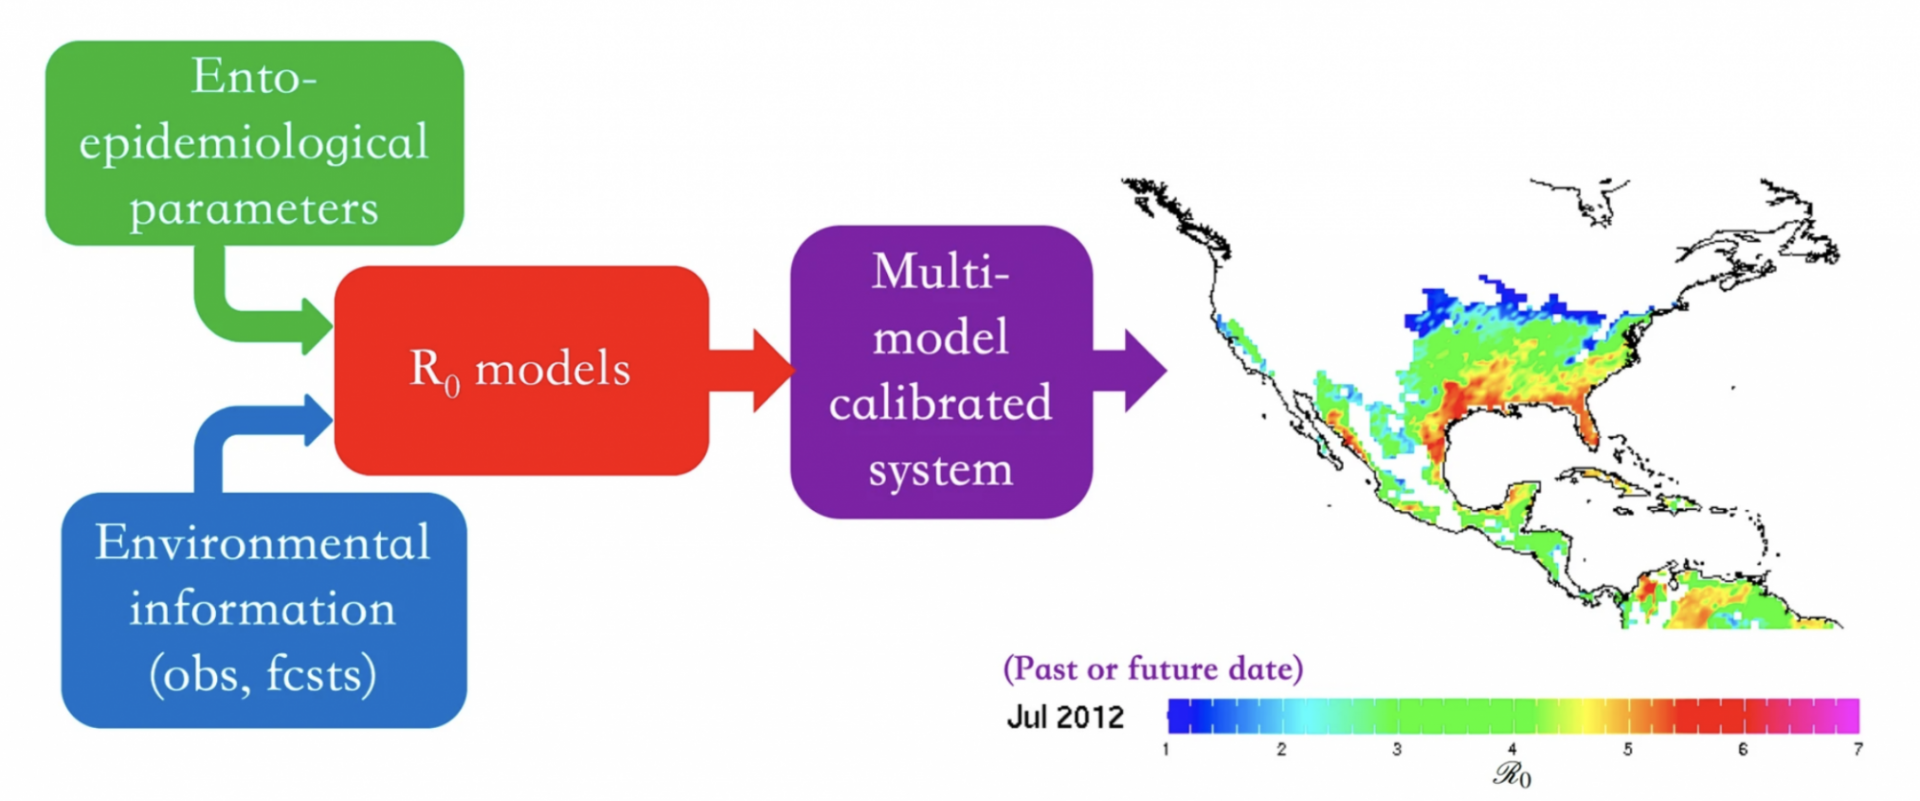 Monitoring and forecast system schematics. Ento-epidemiological and environmental information (obs: climate observations, fcsts: climate forecasts) are used to force four ℛ0 models. Each model is independently calibrated using a pattern-based post-processing approach before being combined.